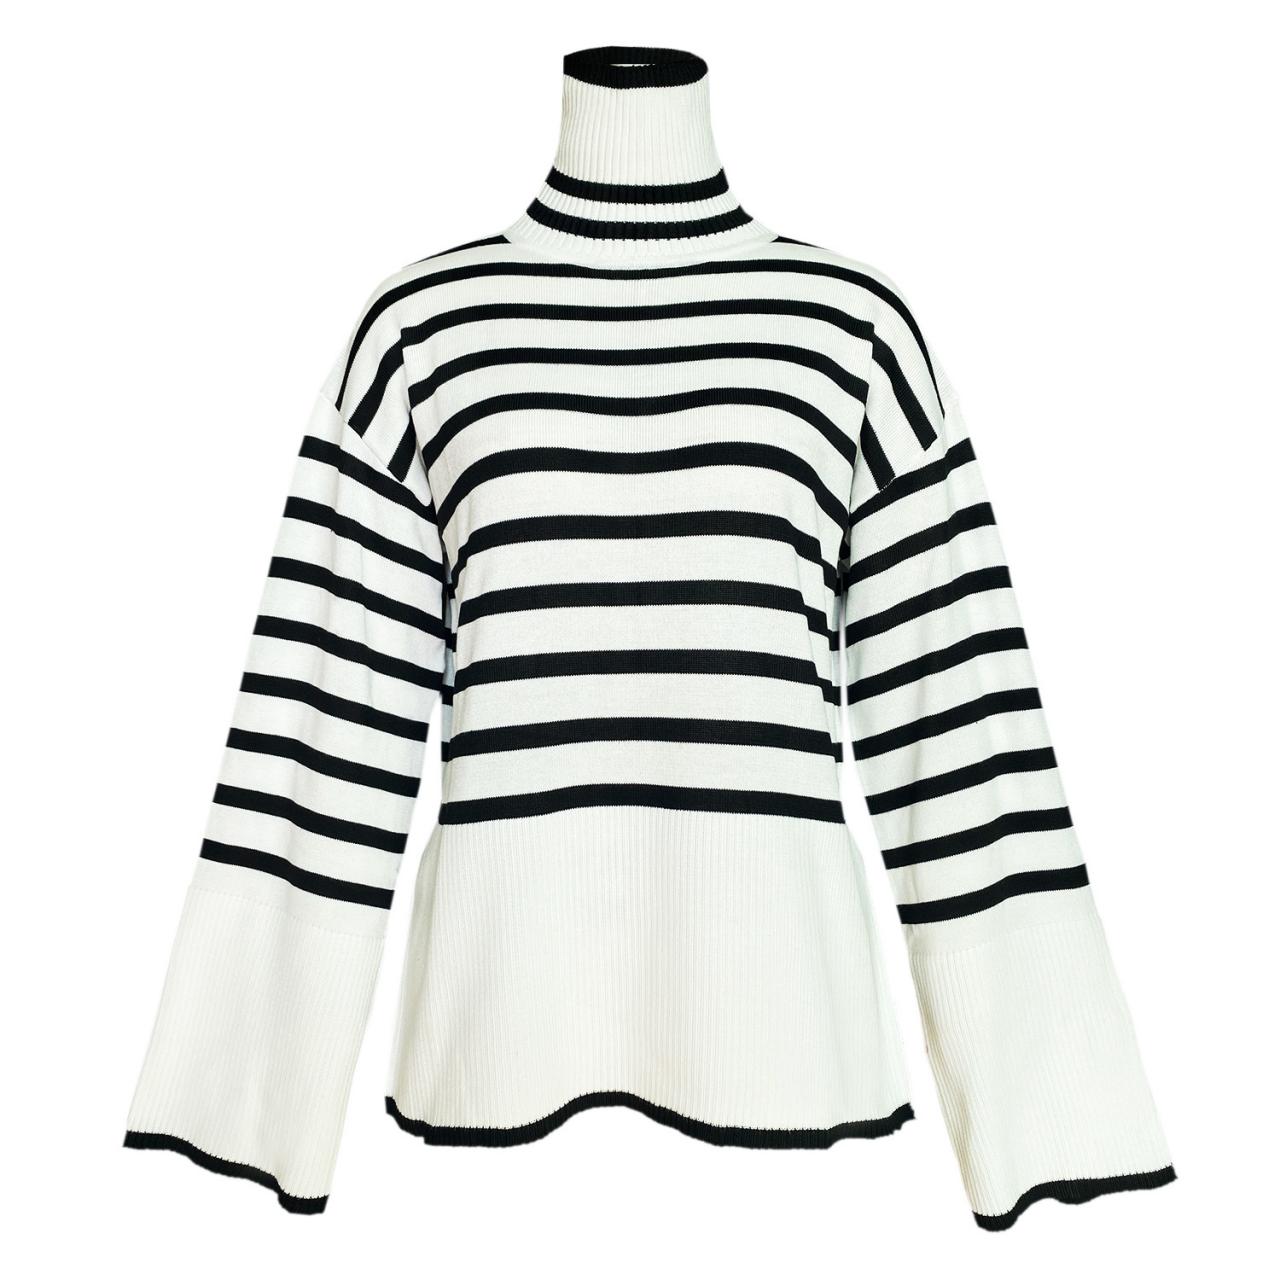 Women's Turtleneck Knitted Striped Sweater Top With Slit